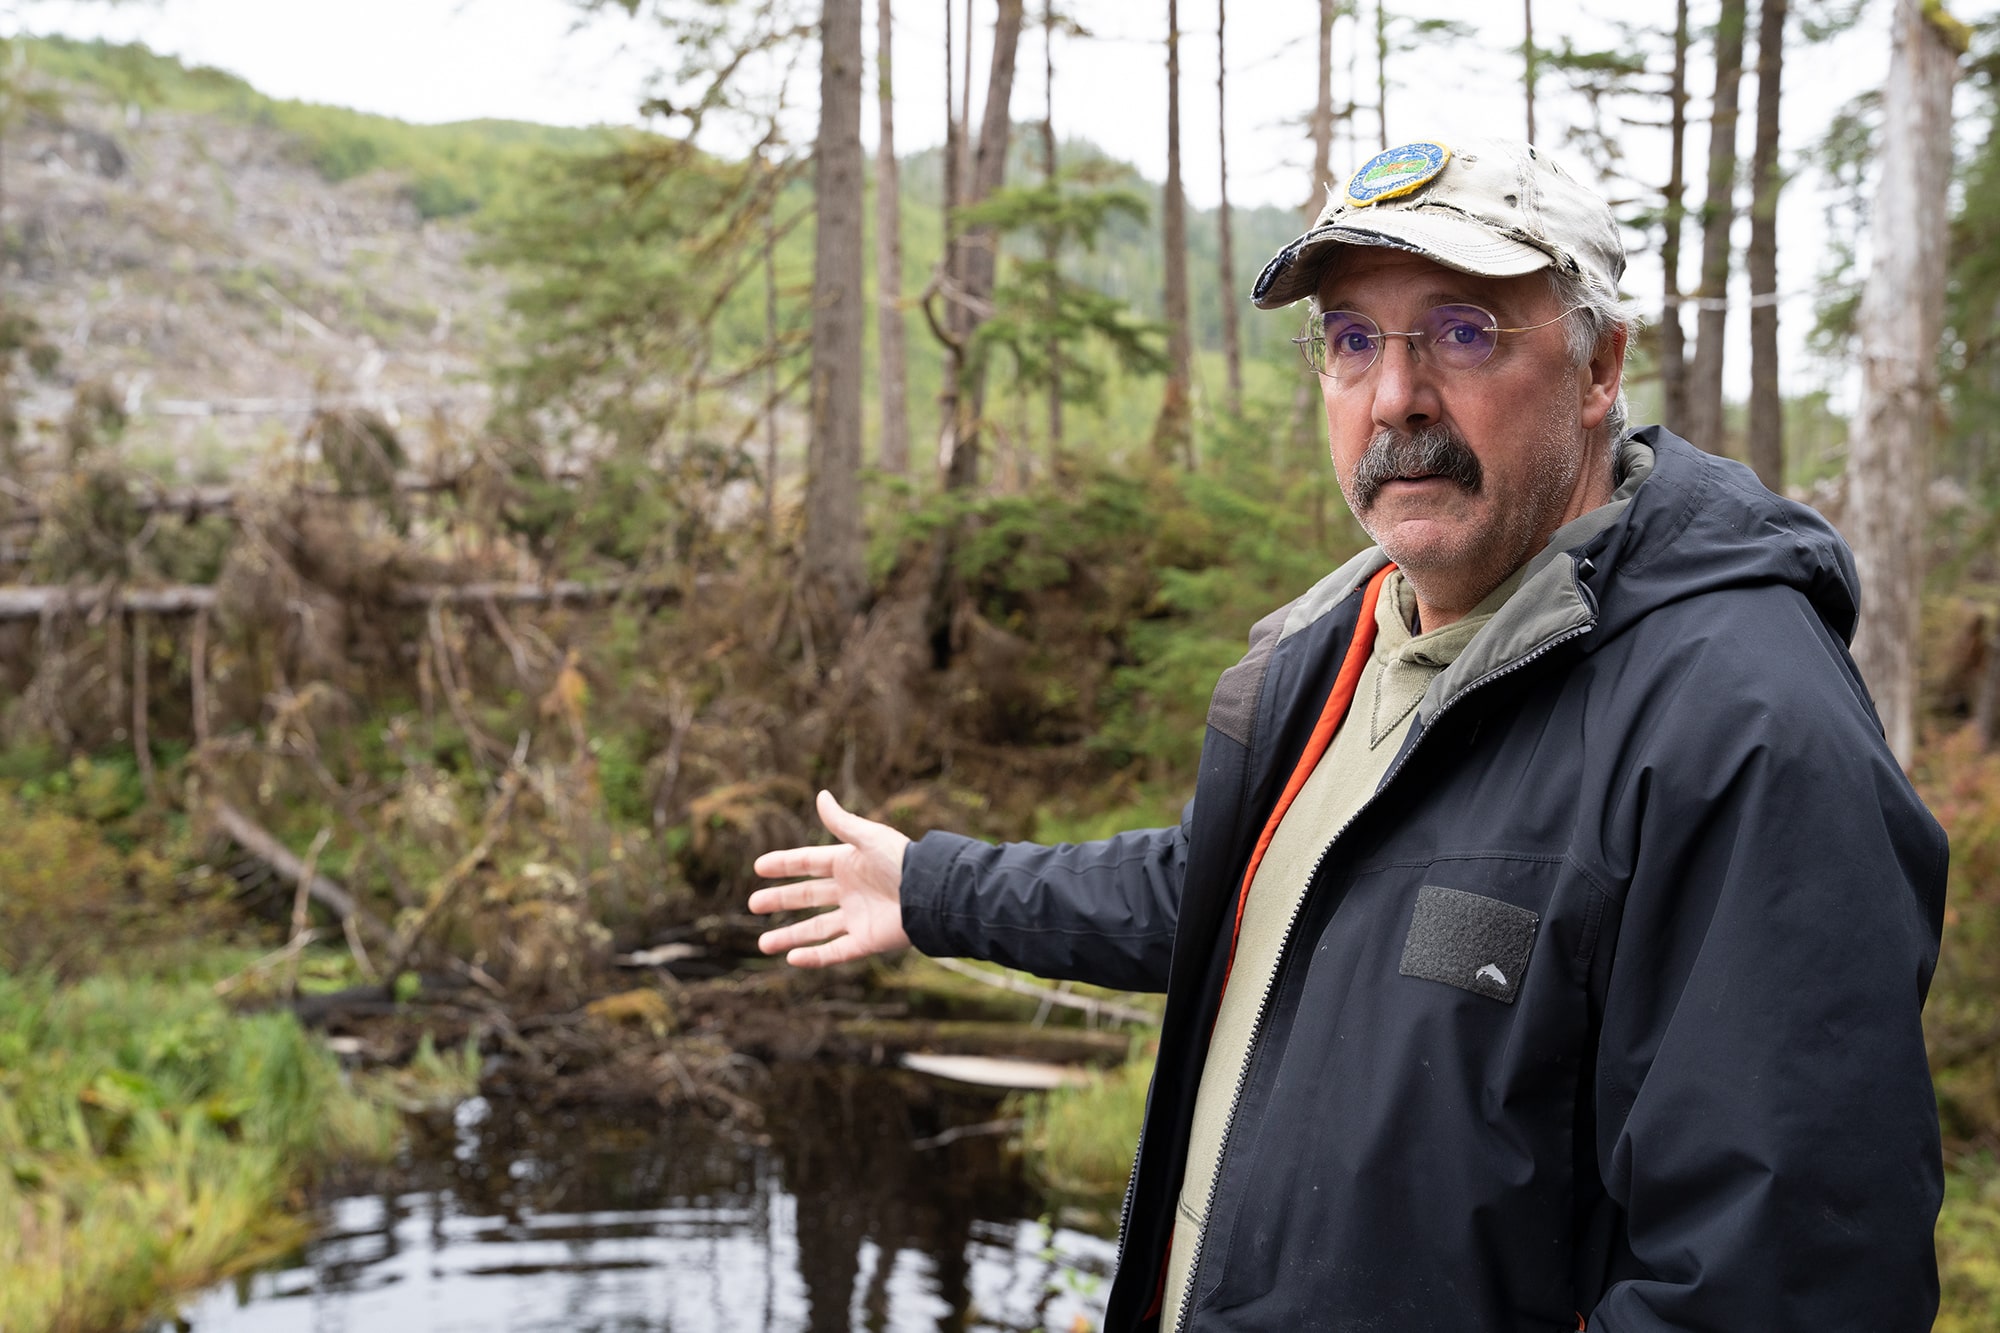 a man with glasses and a mustache wearing a black jacket gestures toward a river with felled trees